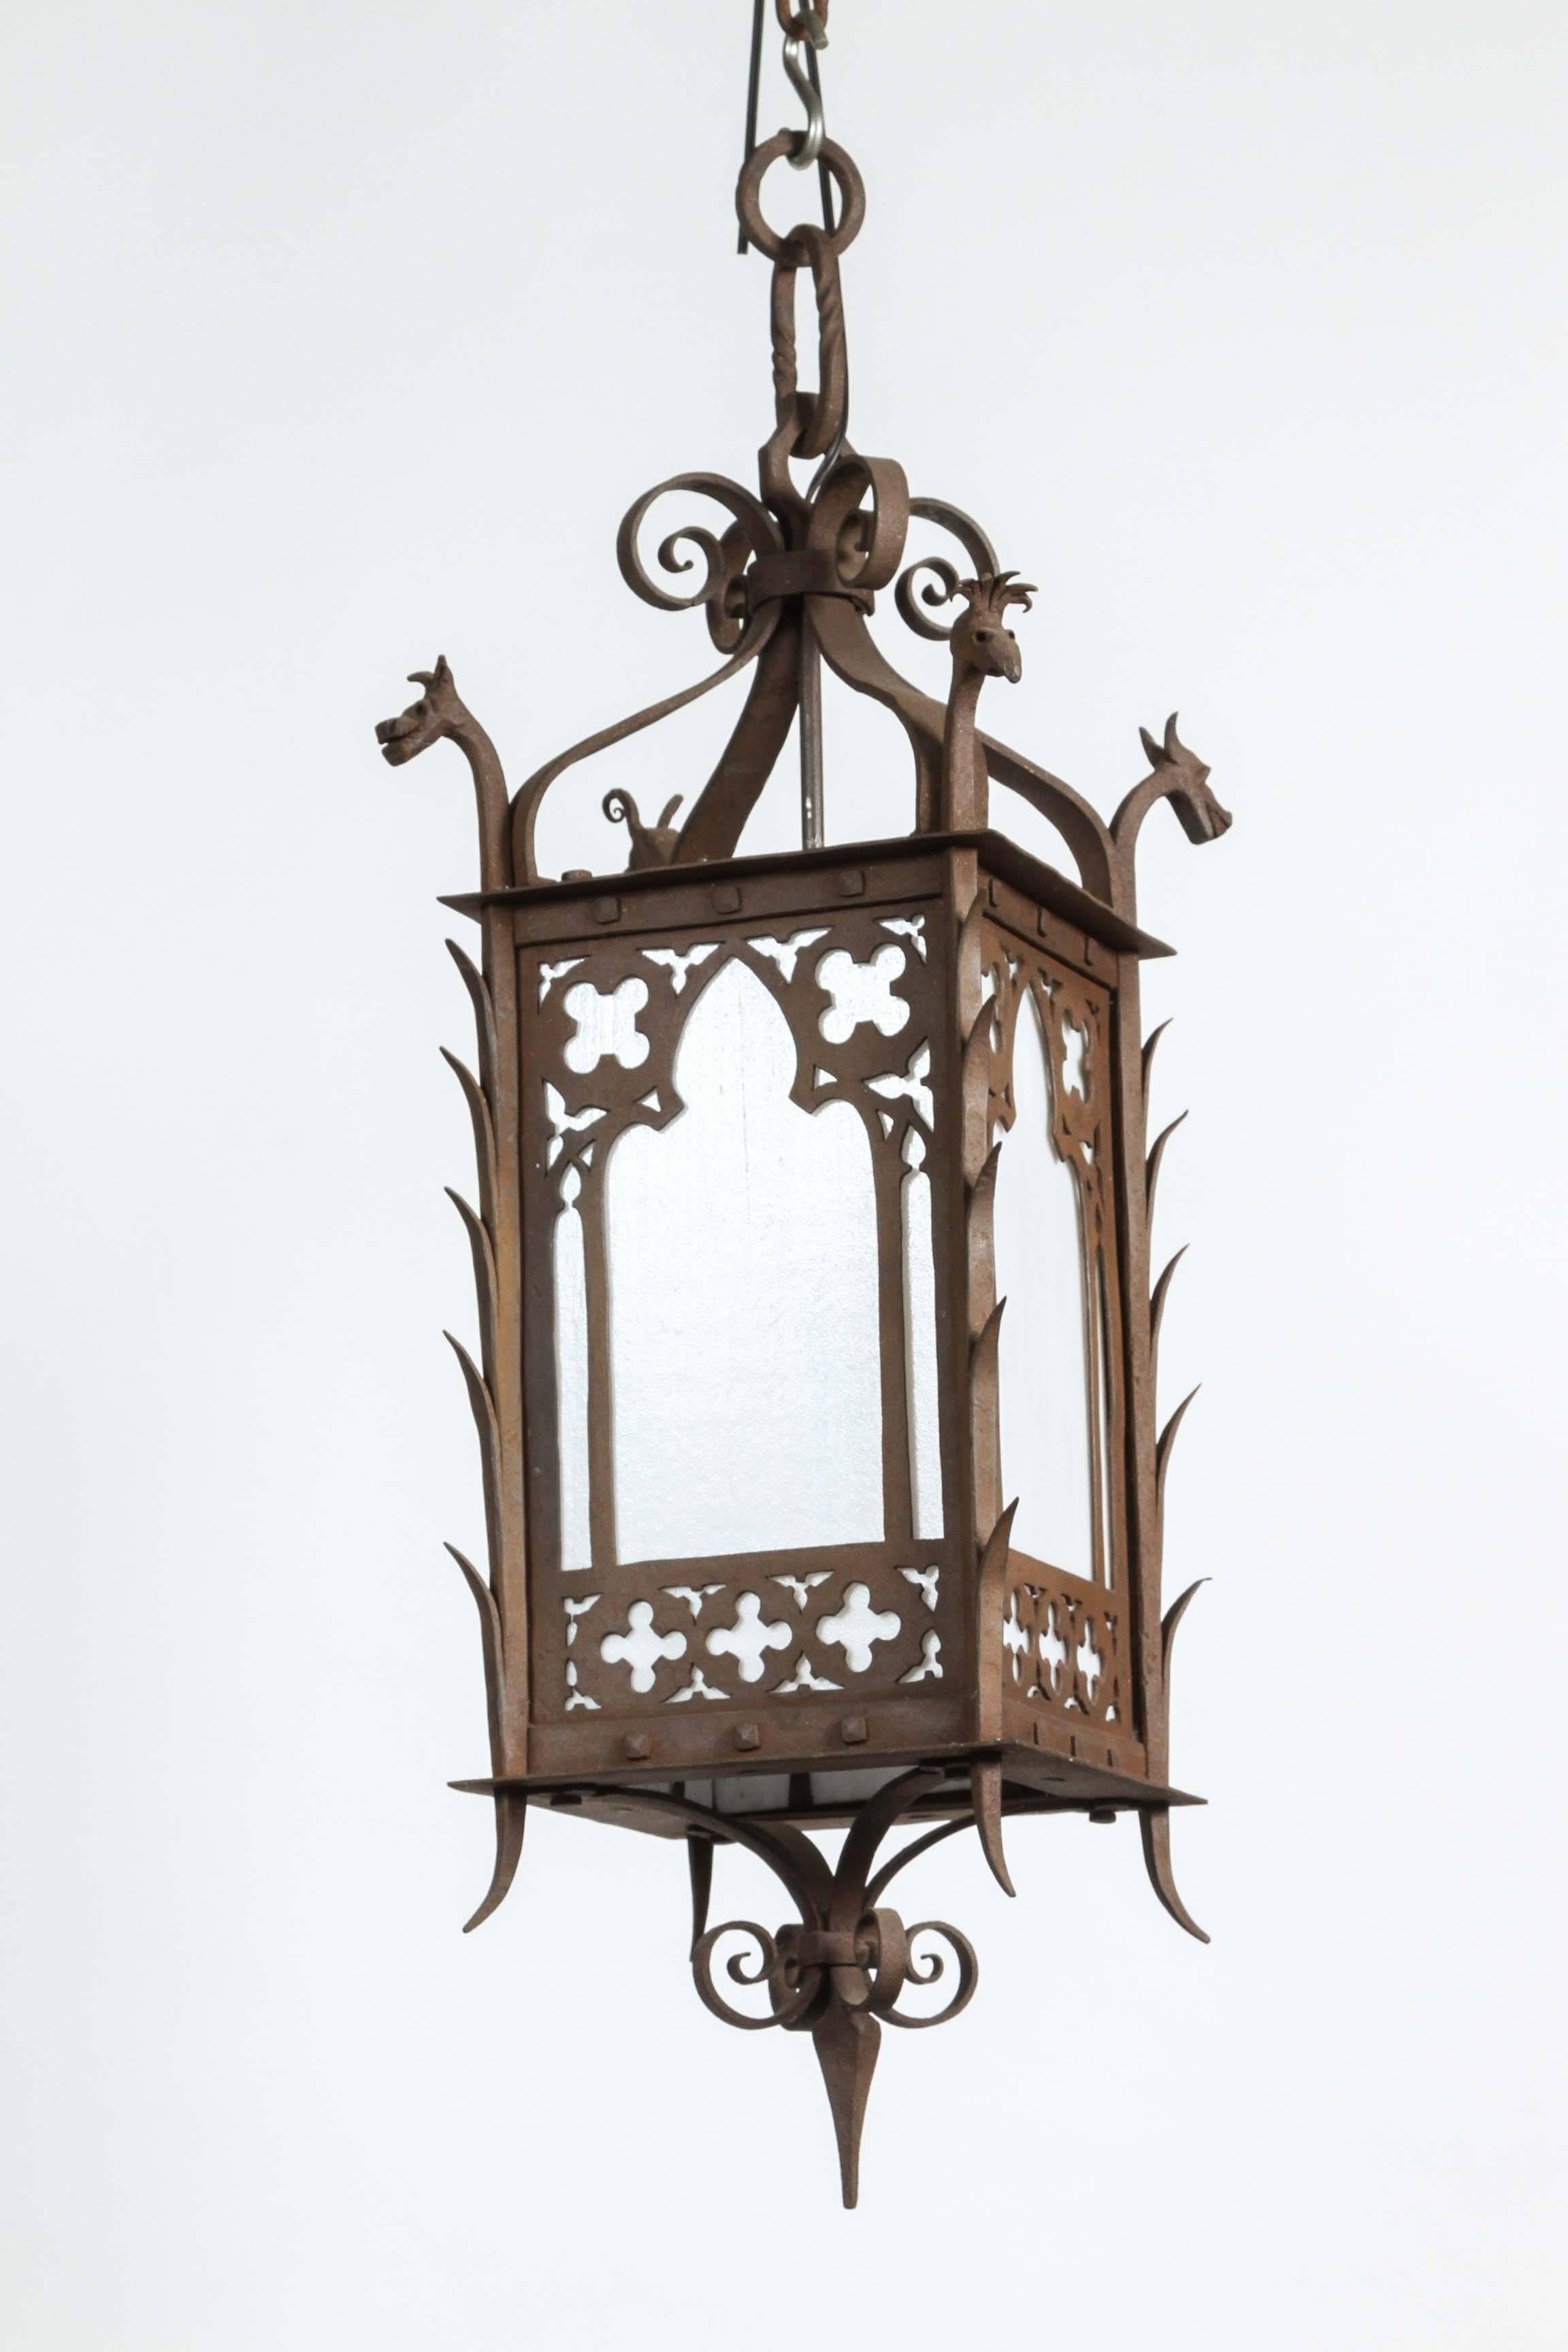 1920s hand-wrought Gothic lantern with four dragon heads with milk glass panels. This can be seen at our 1800 South Grand Ave location in Downtown Los Angeles.